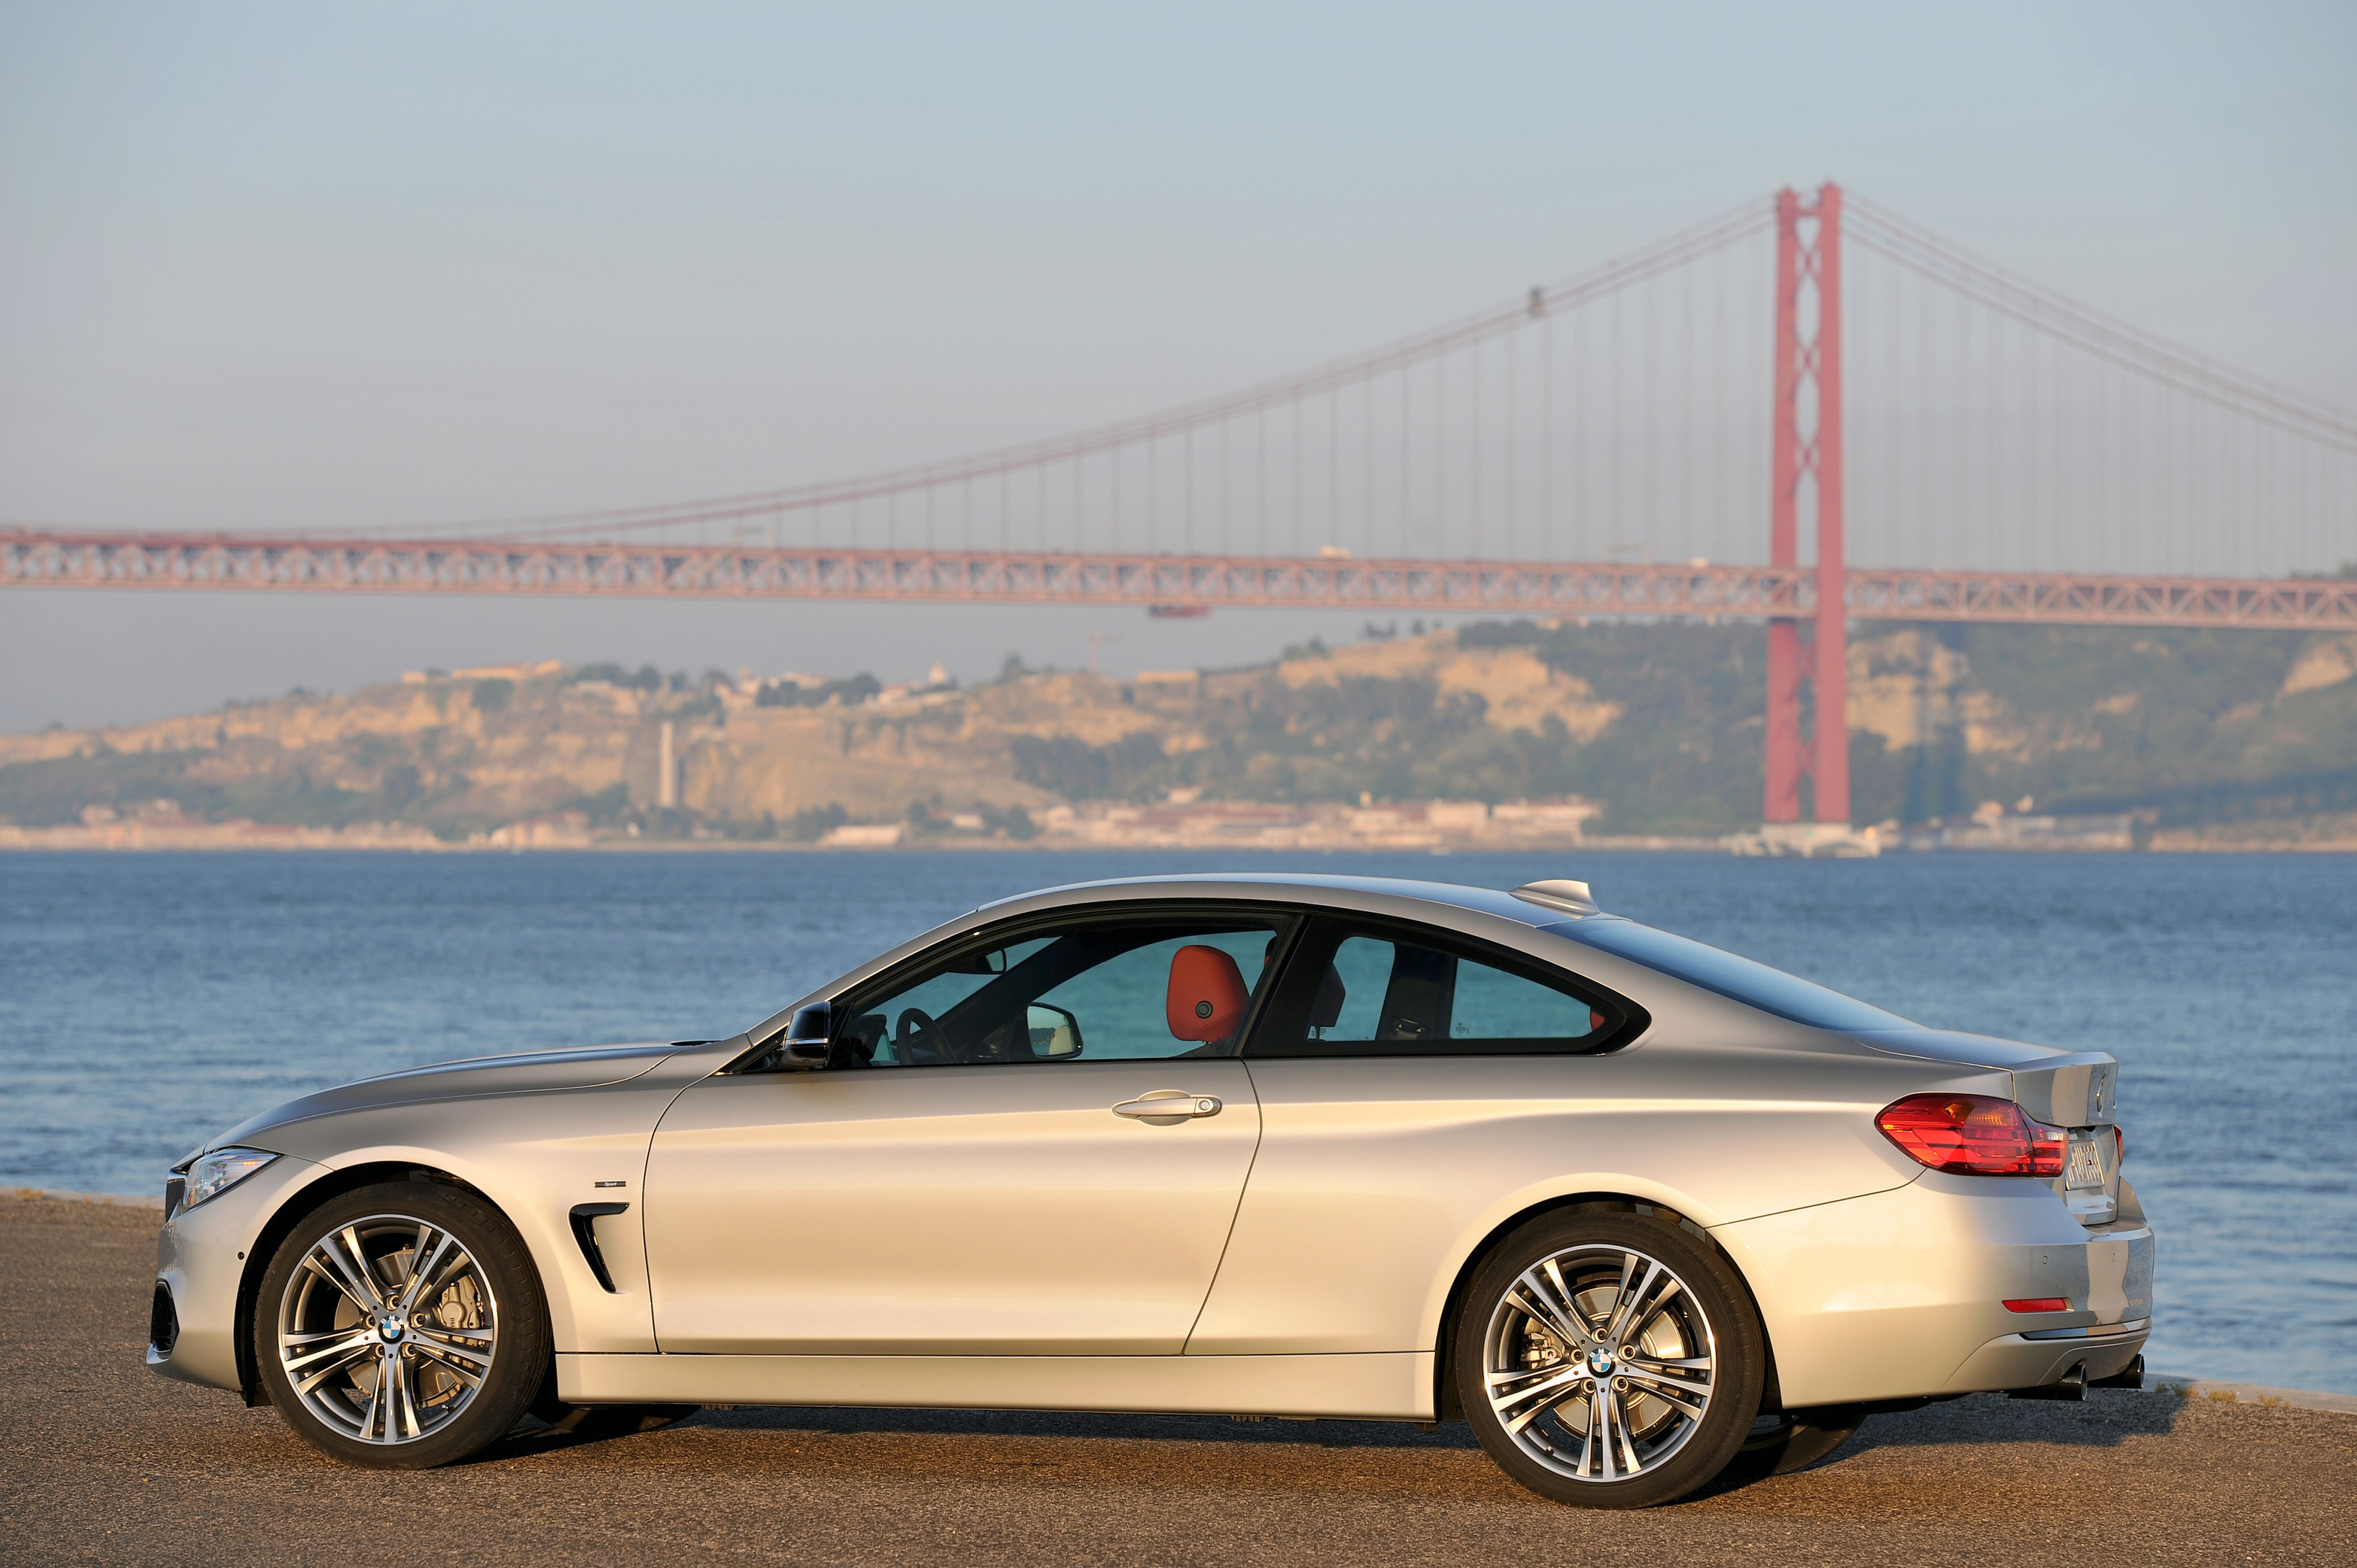 Vehicles BMW 4 Series HD Wallpaper | Background Image